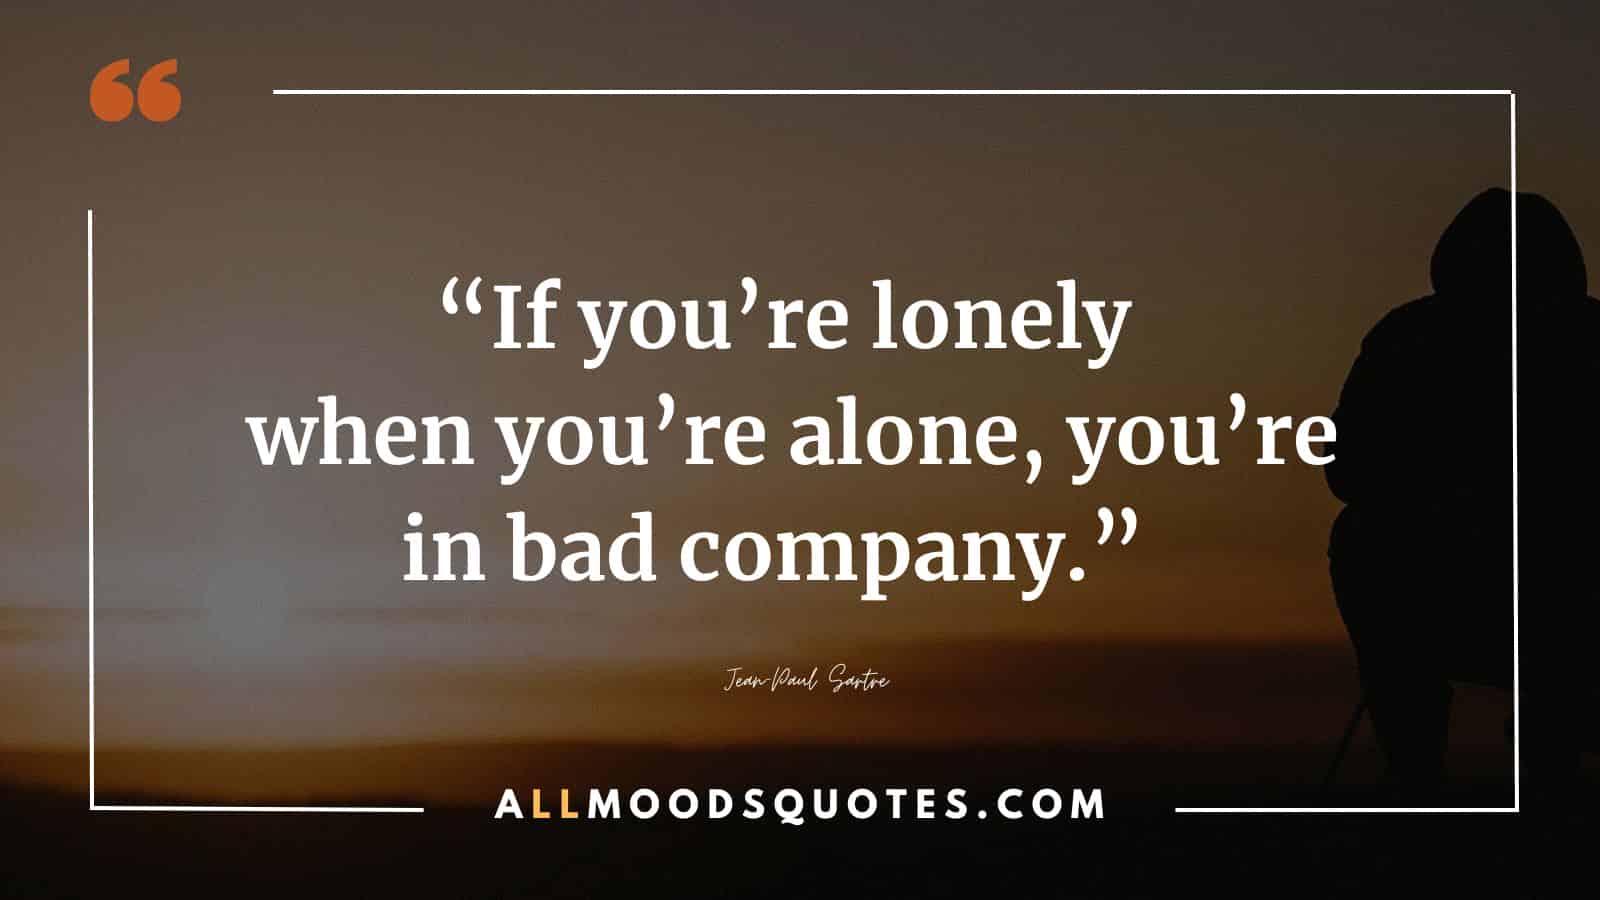 “If you’re lonely when you’re alone, you’re in bad company.” ― Jean-Paul Sartre
